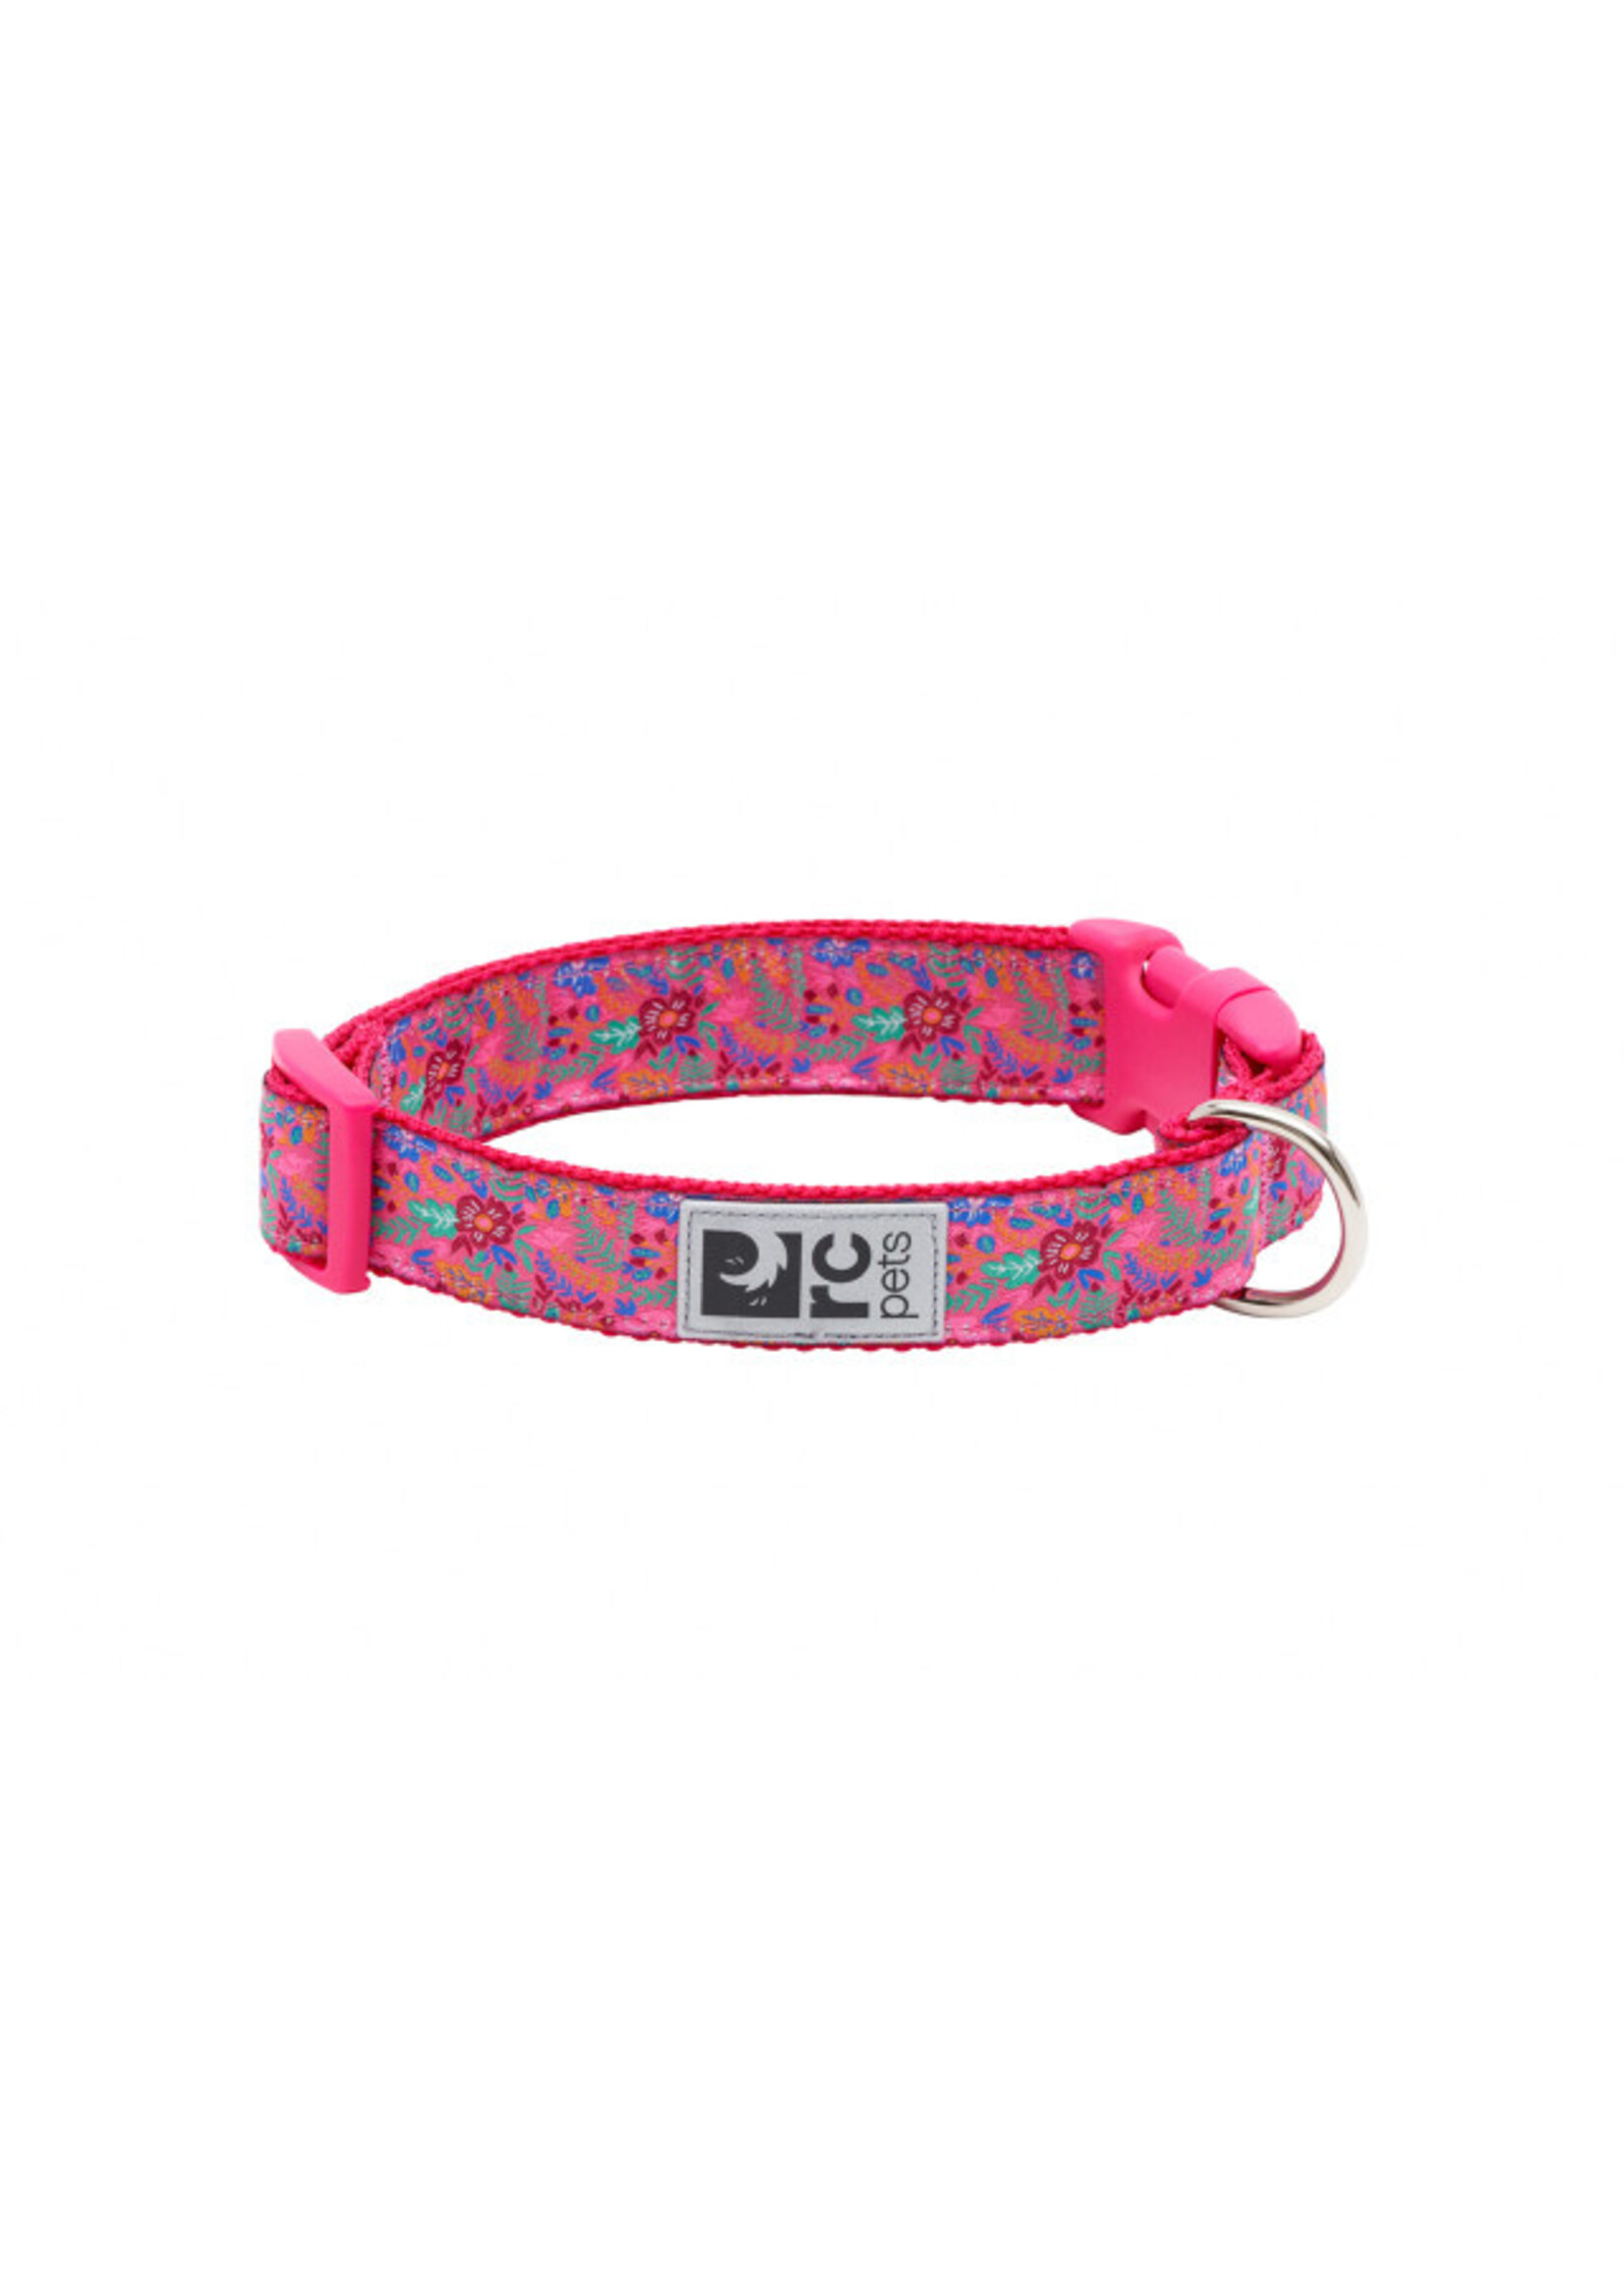 RC Pet Products RC Pet Clip Collar * New Patterns*